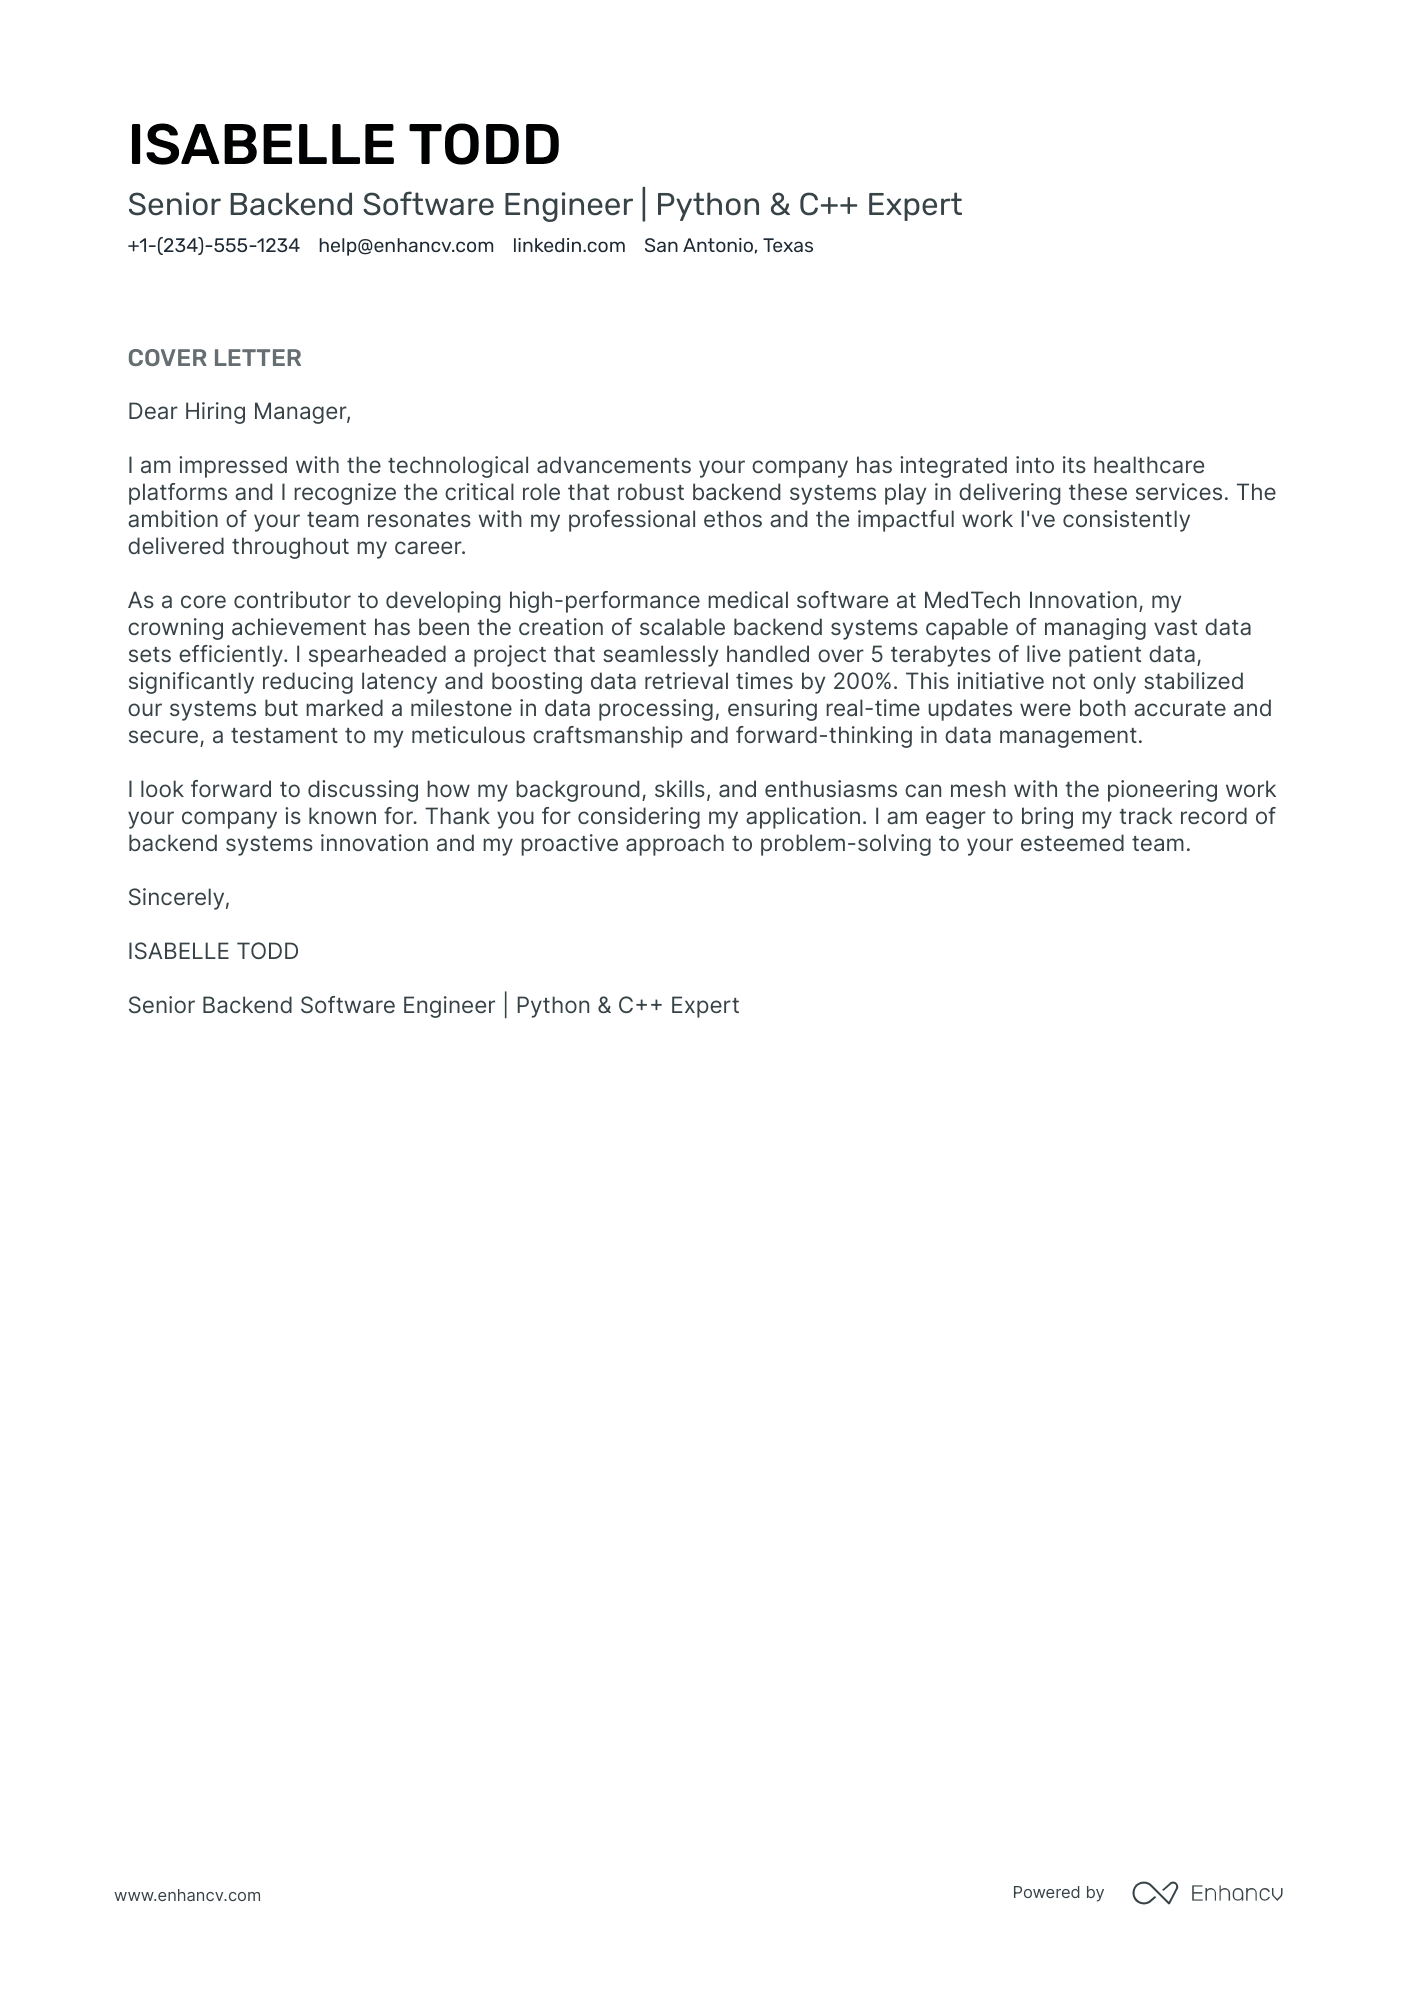 Cybersecurity Engineer cover letter